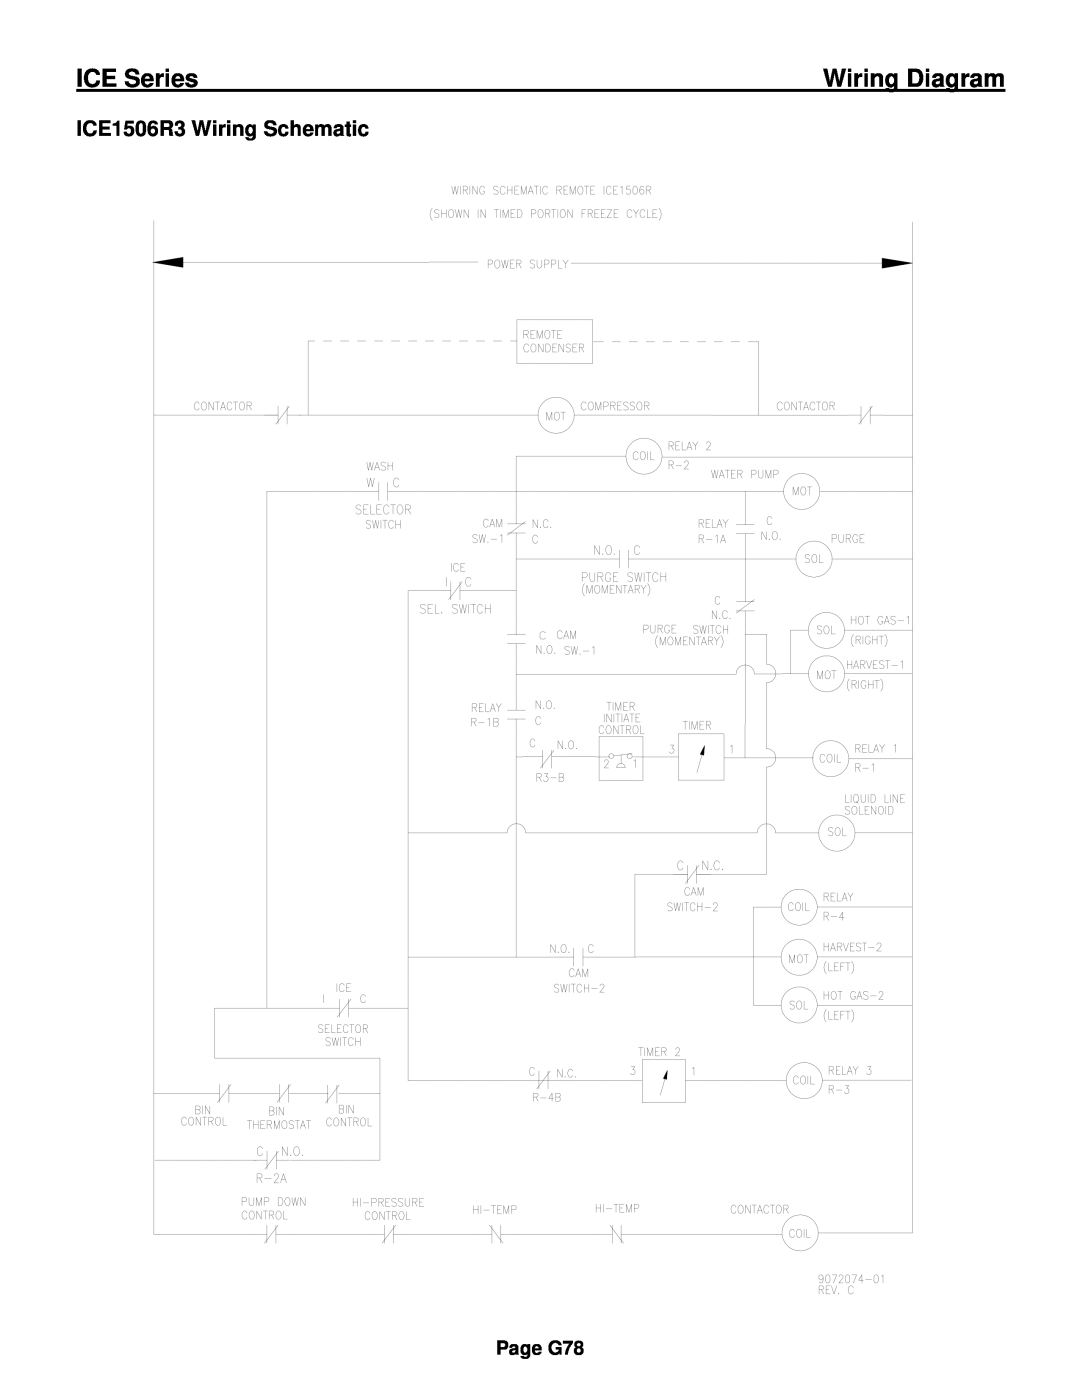 Ice-O-Matic ICE0250 Series installation manual ICE1506R3 Wiring Schematic, ICE Series, Wiring Diagram, Page G78 